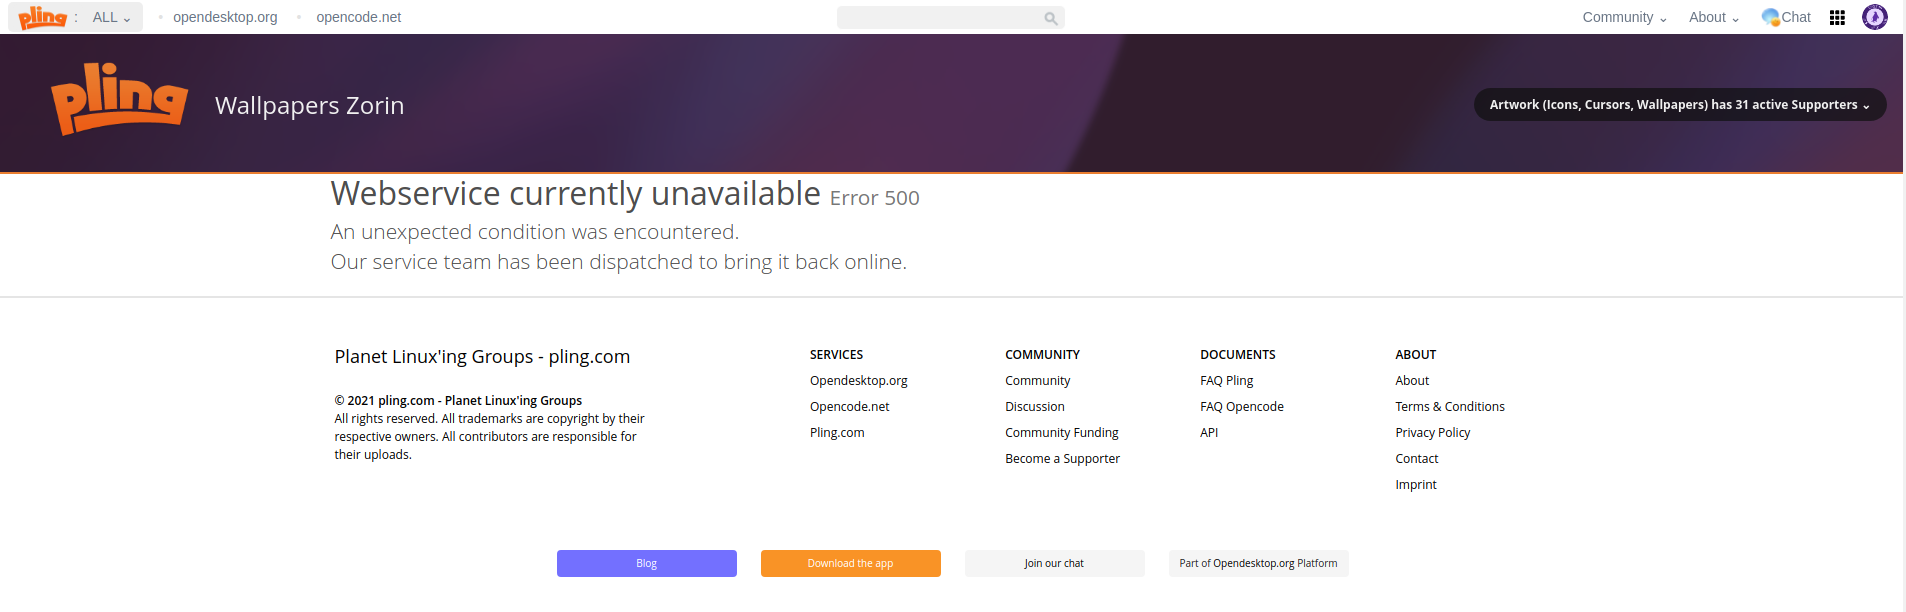 Webservice currently unavailable